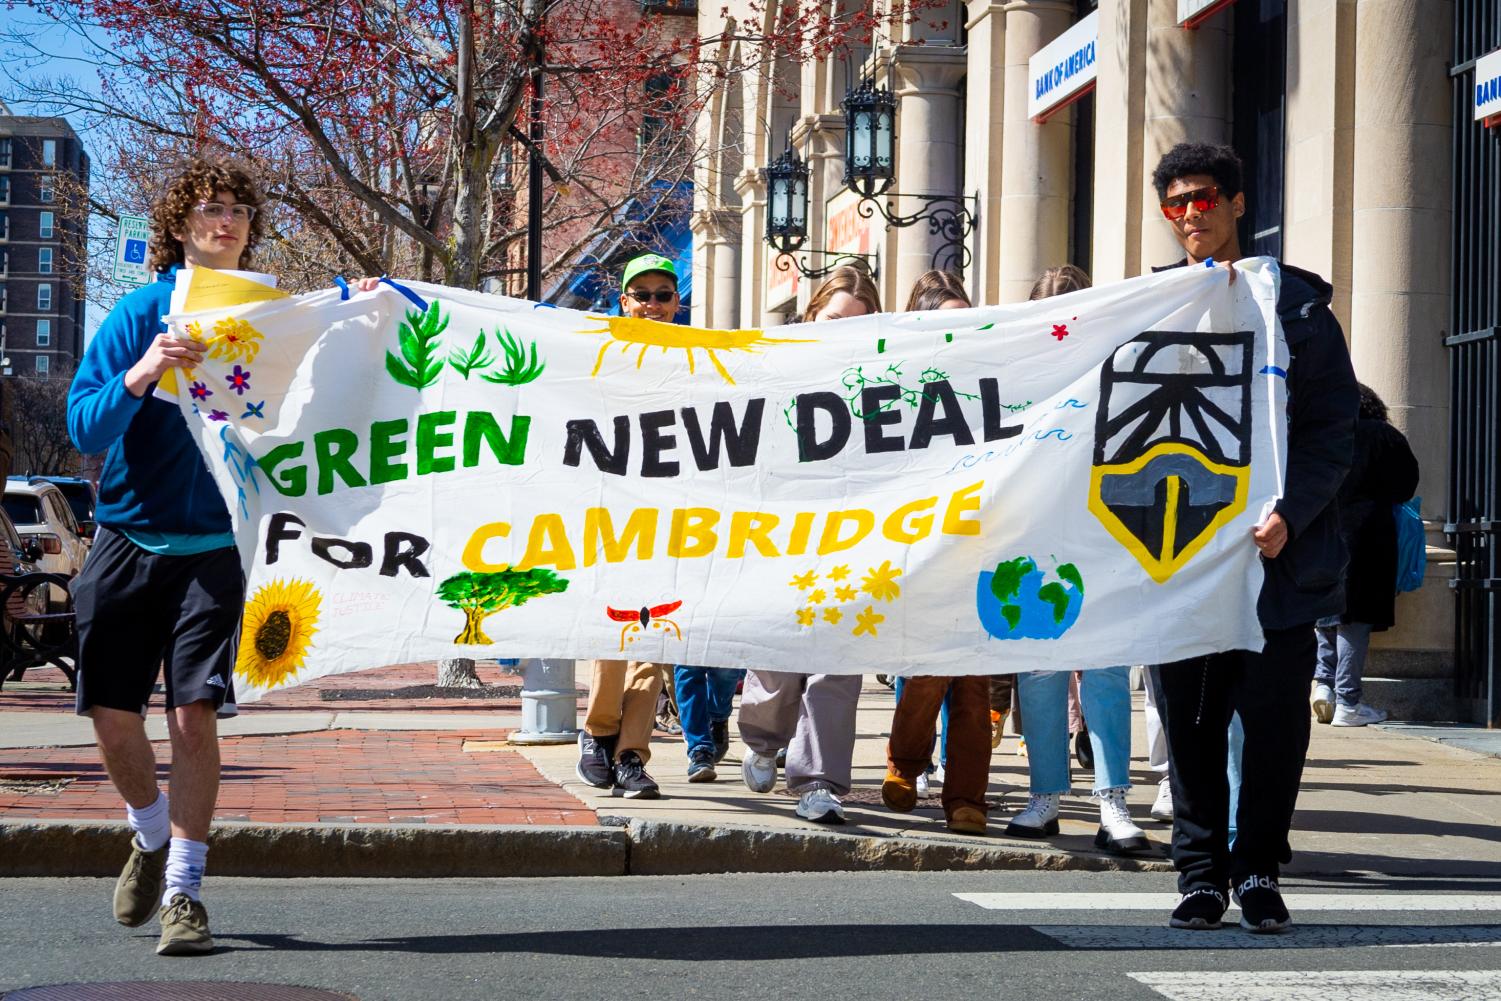 CRLS students show their support for the Green New Deal.